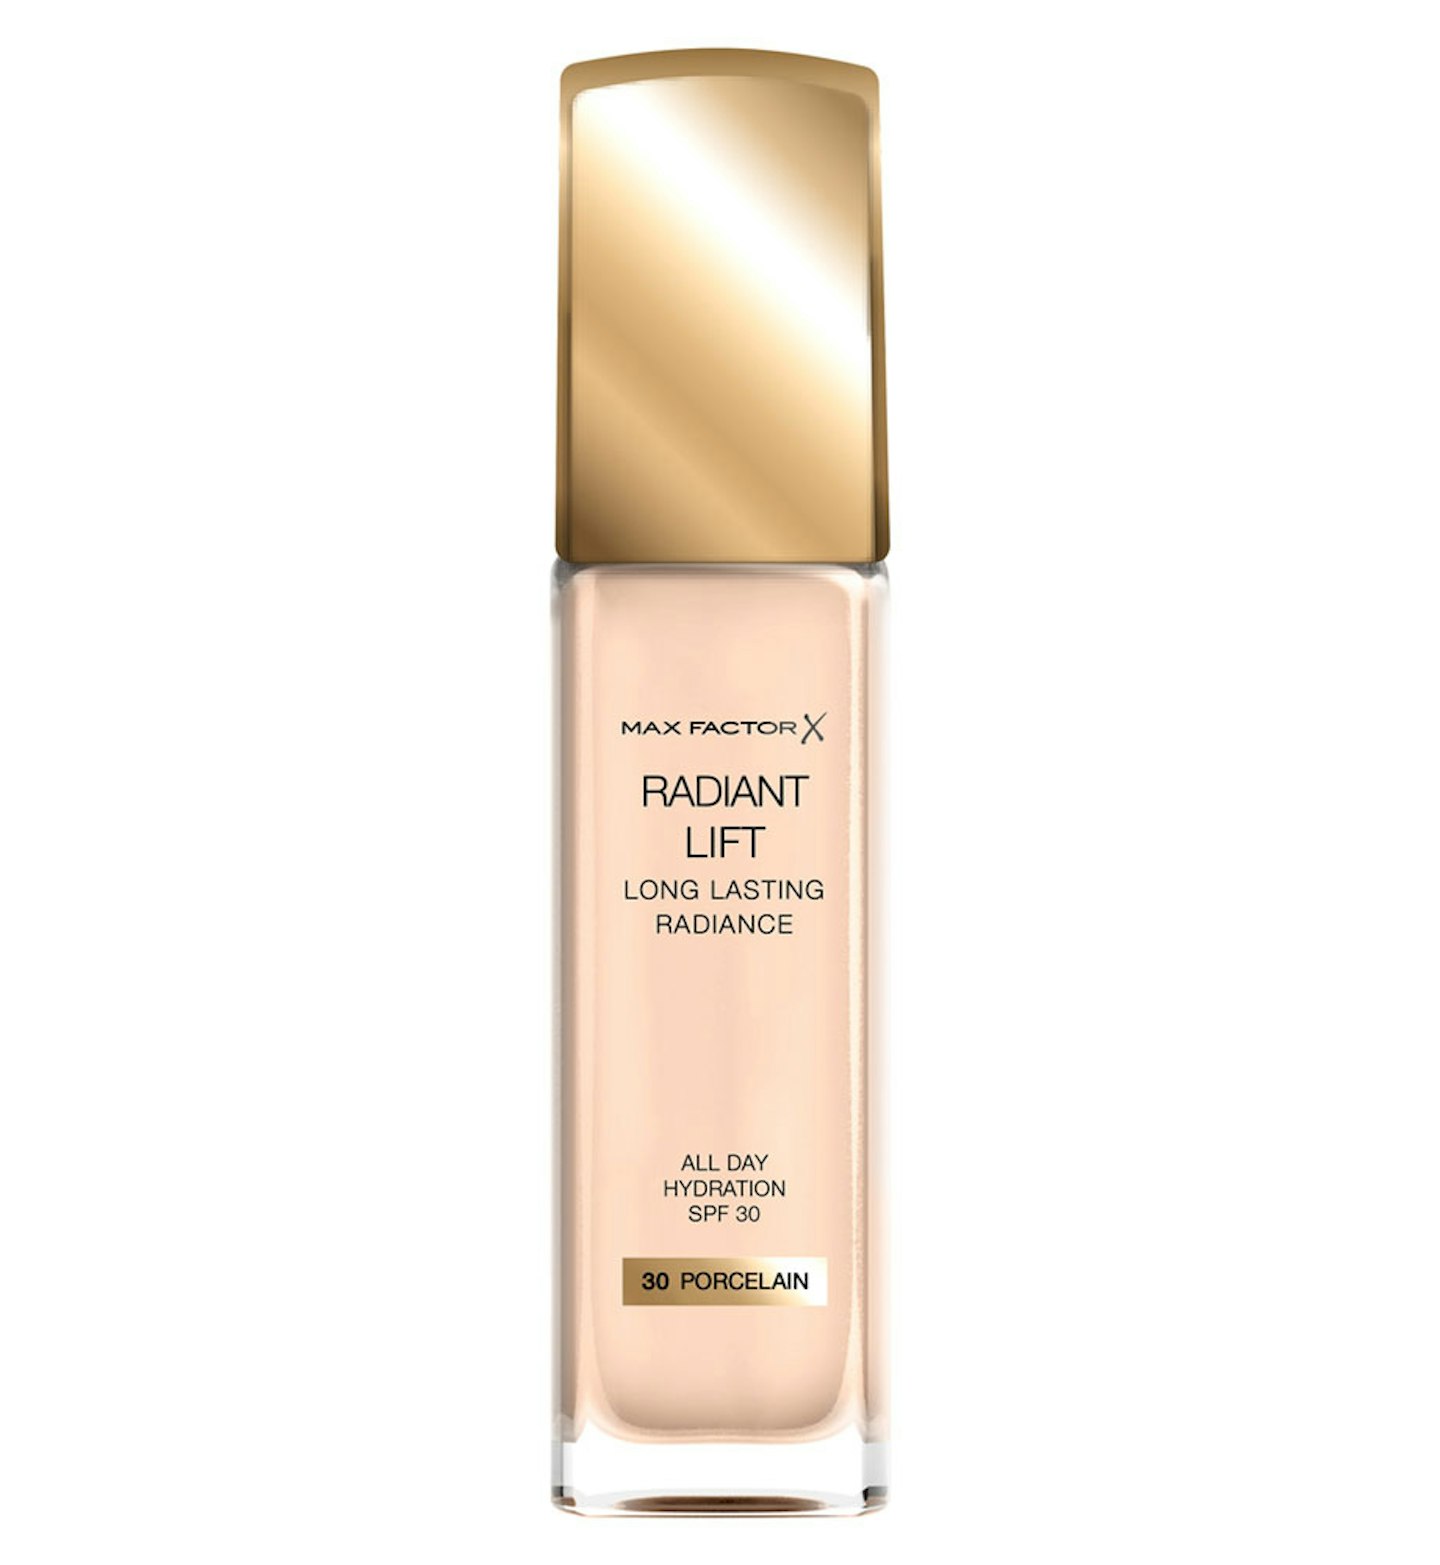 Max Factor Radiant Lift Foundation, £14.99 from Boots